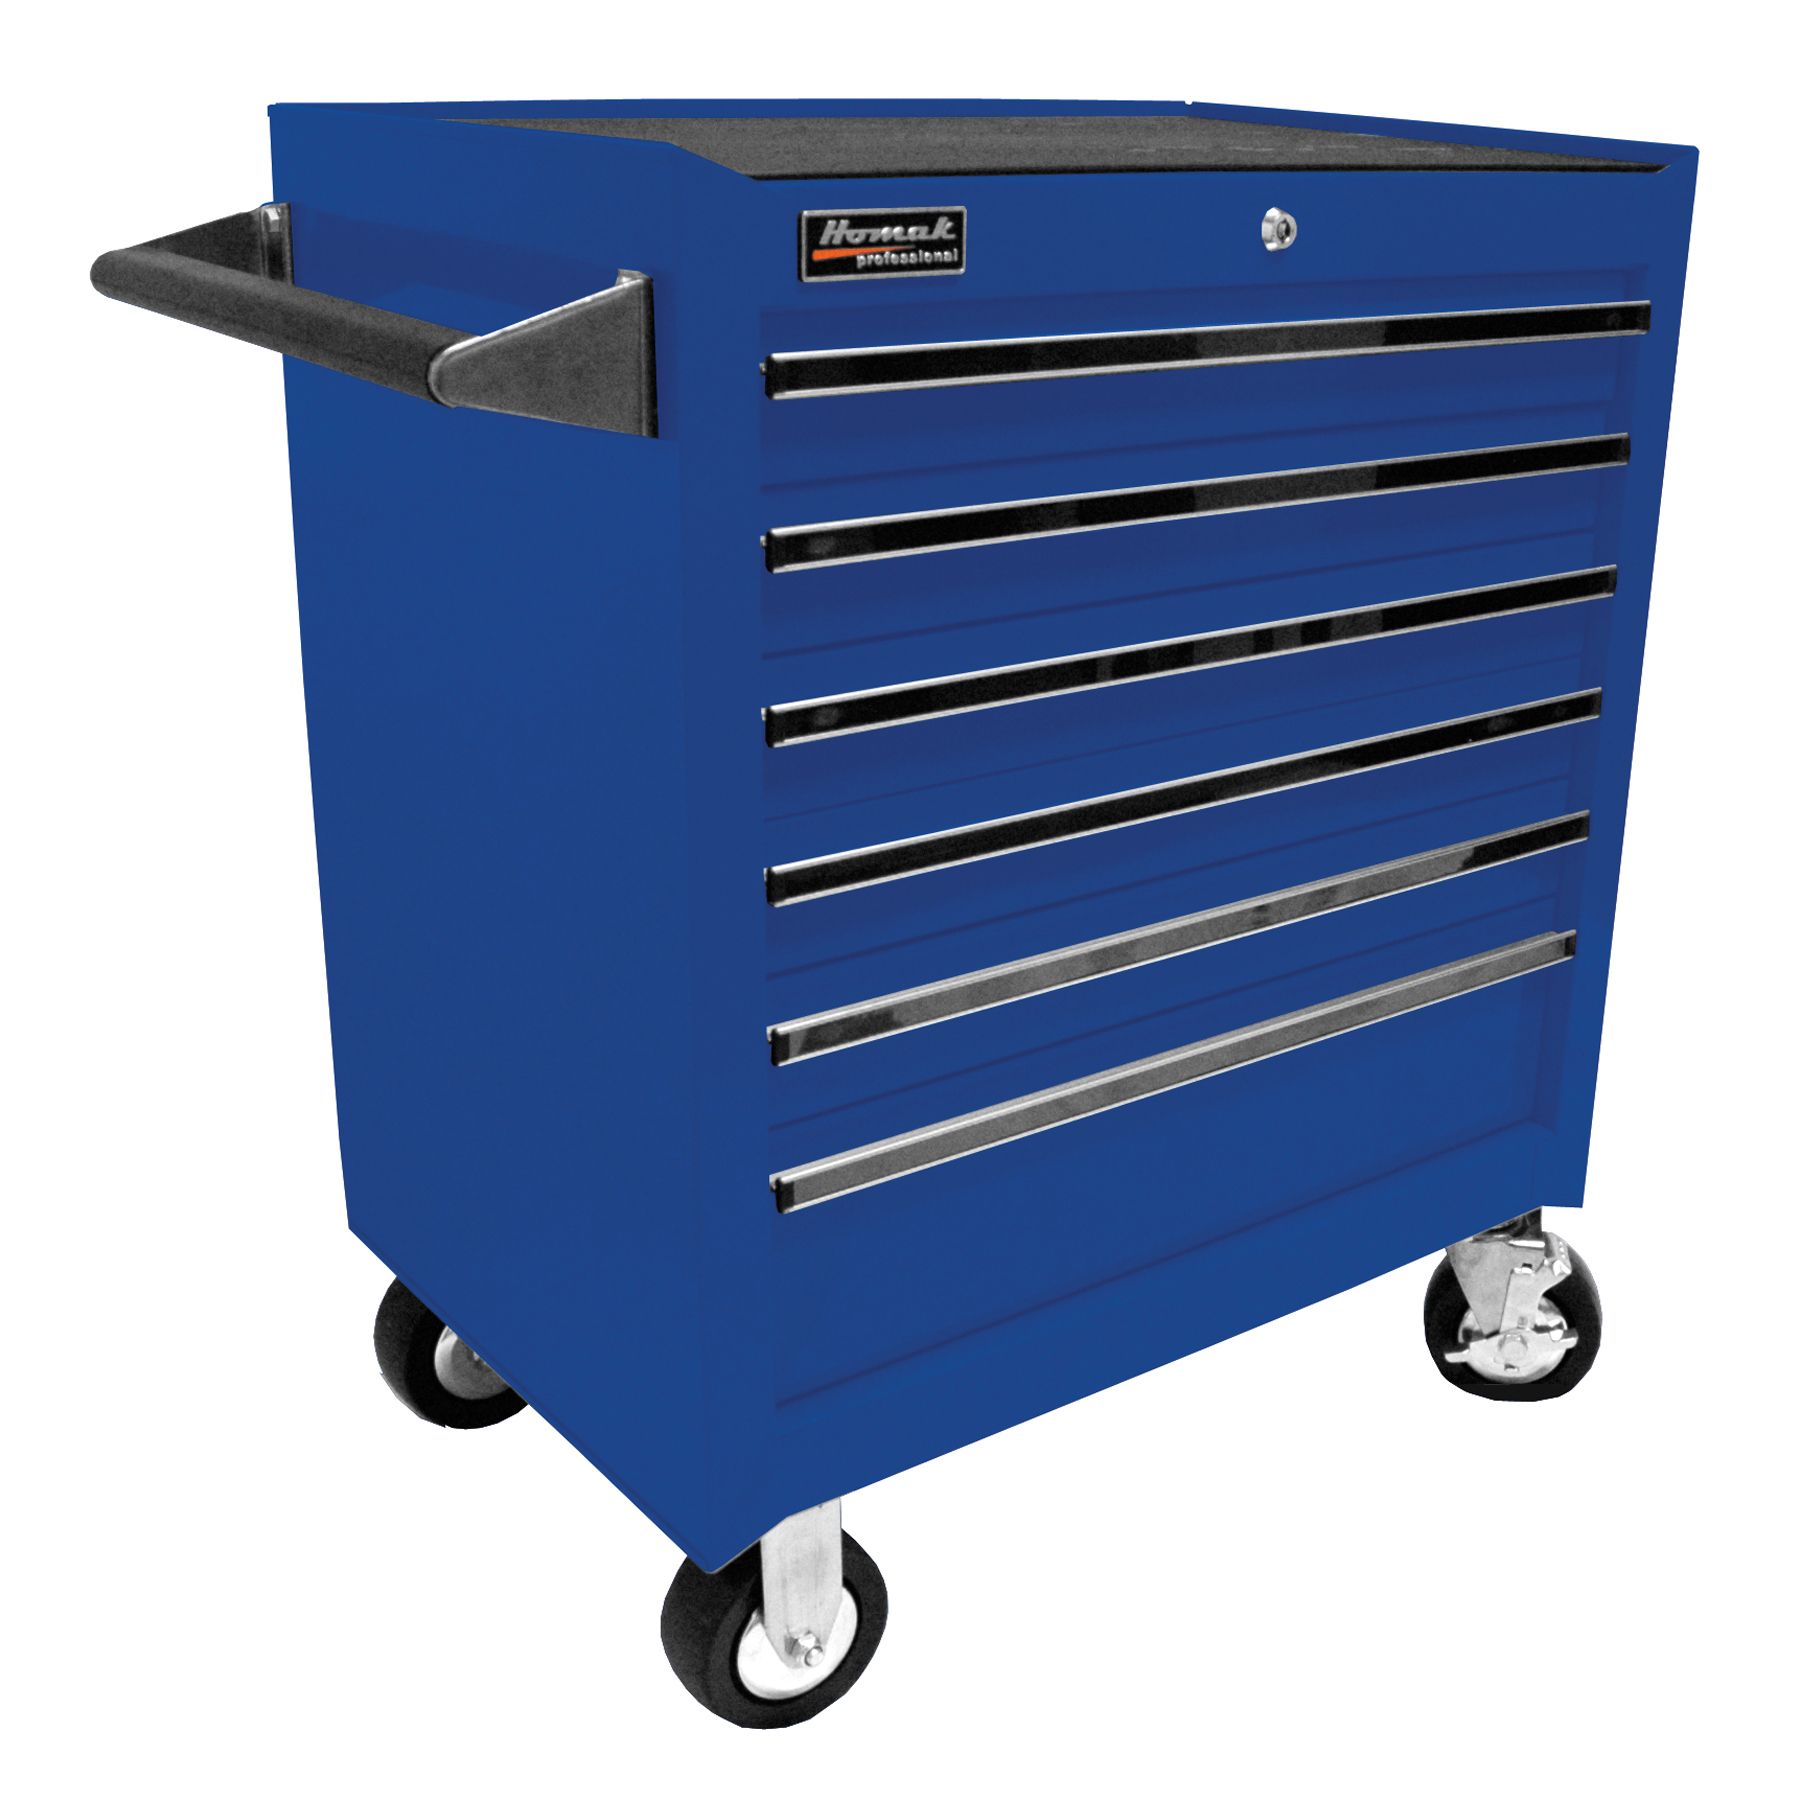 Homak 27 in Professional 6 Drawer Rolling Cabinet - Blue